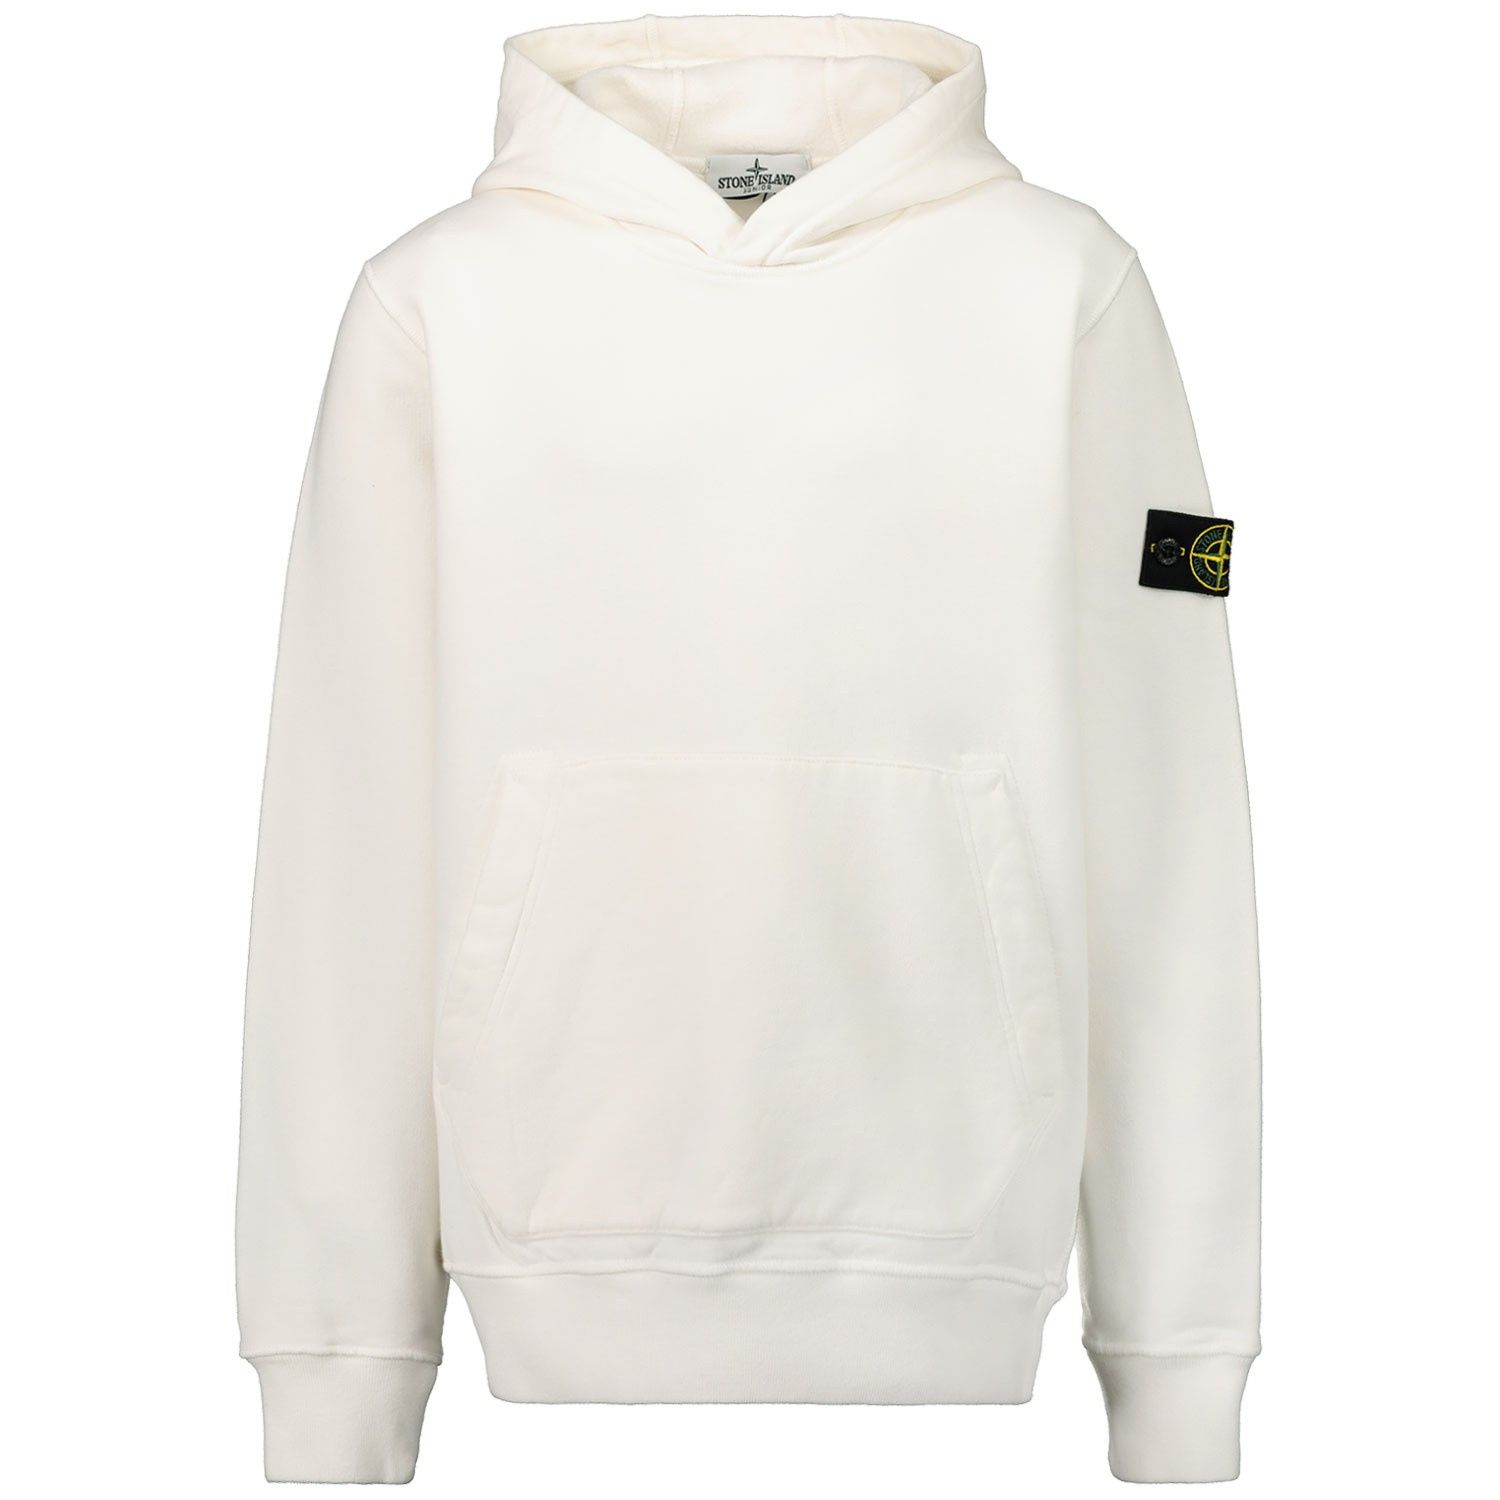 Picture of Stone Island 61640 kids sweater white